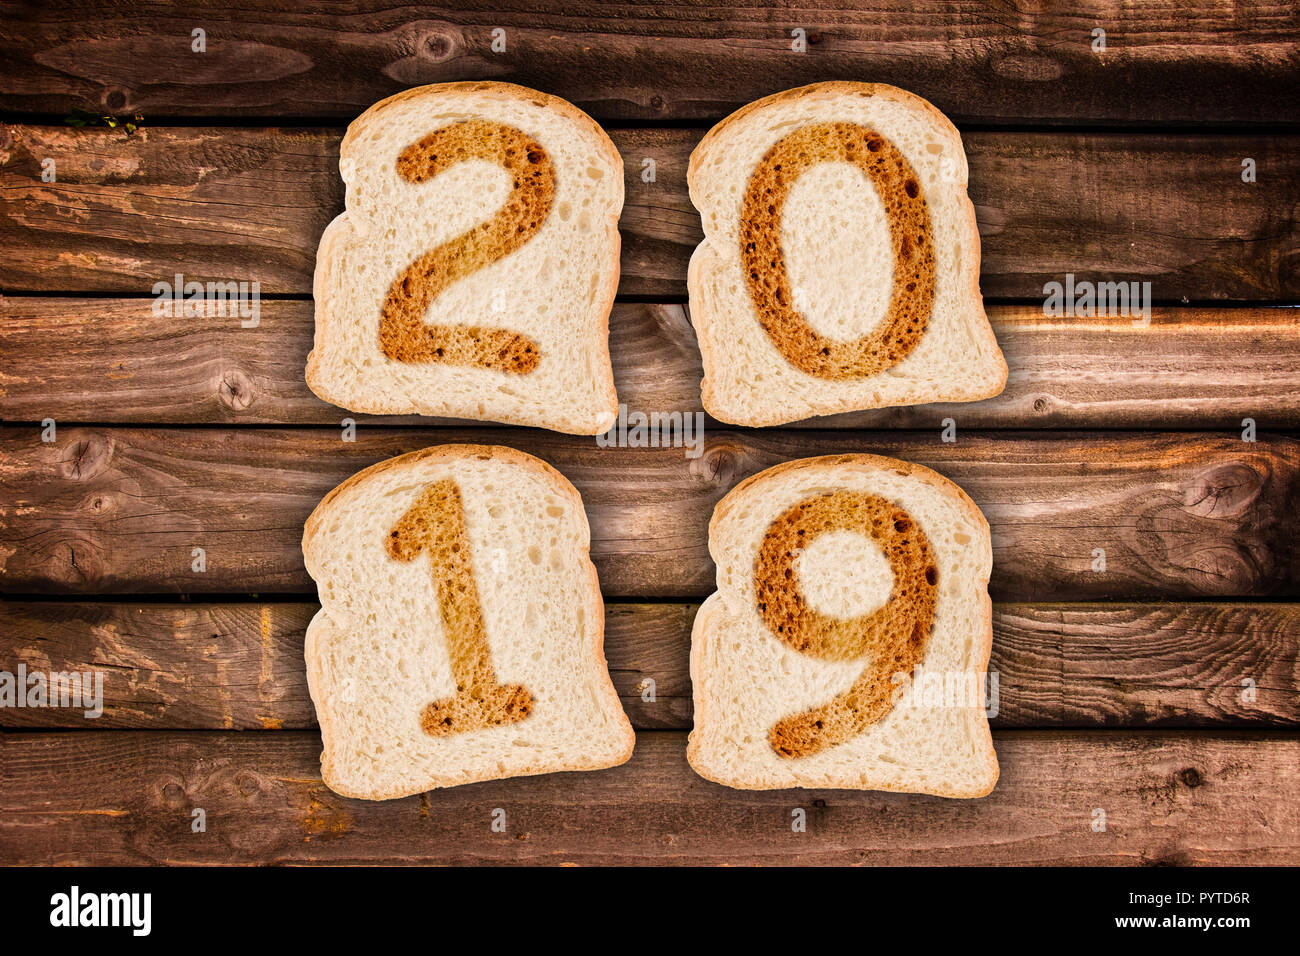 2019 greeting card toasted slices of bread on wooden planks background Stock Photo